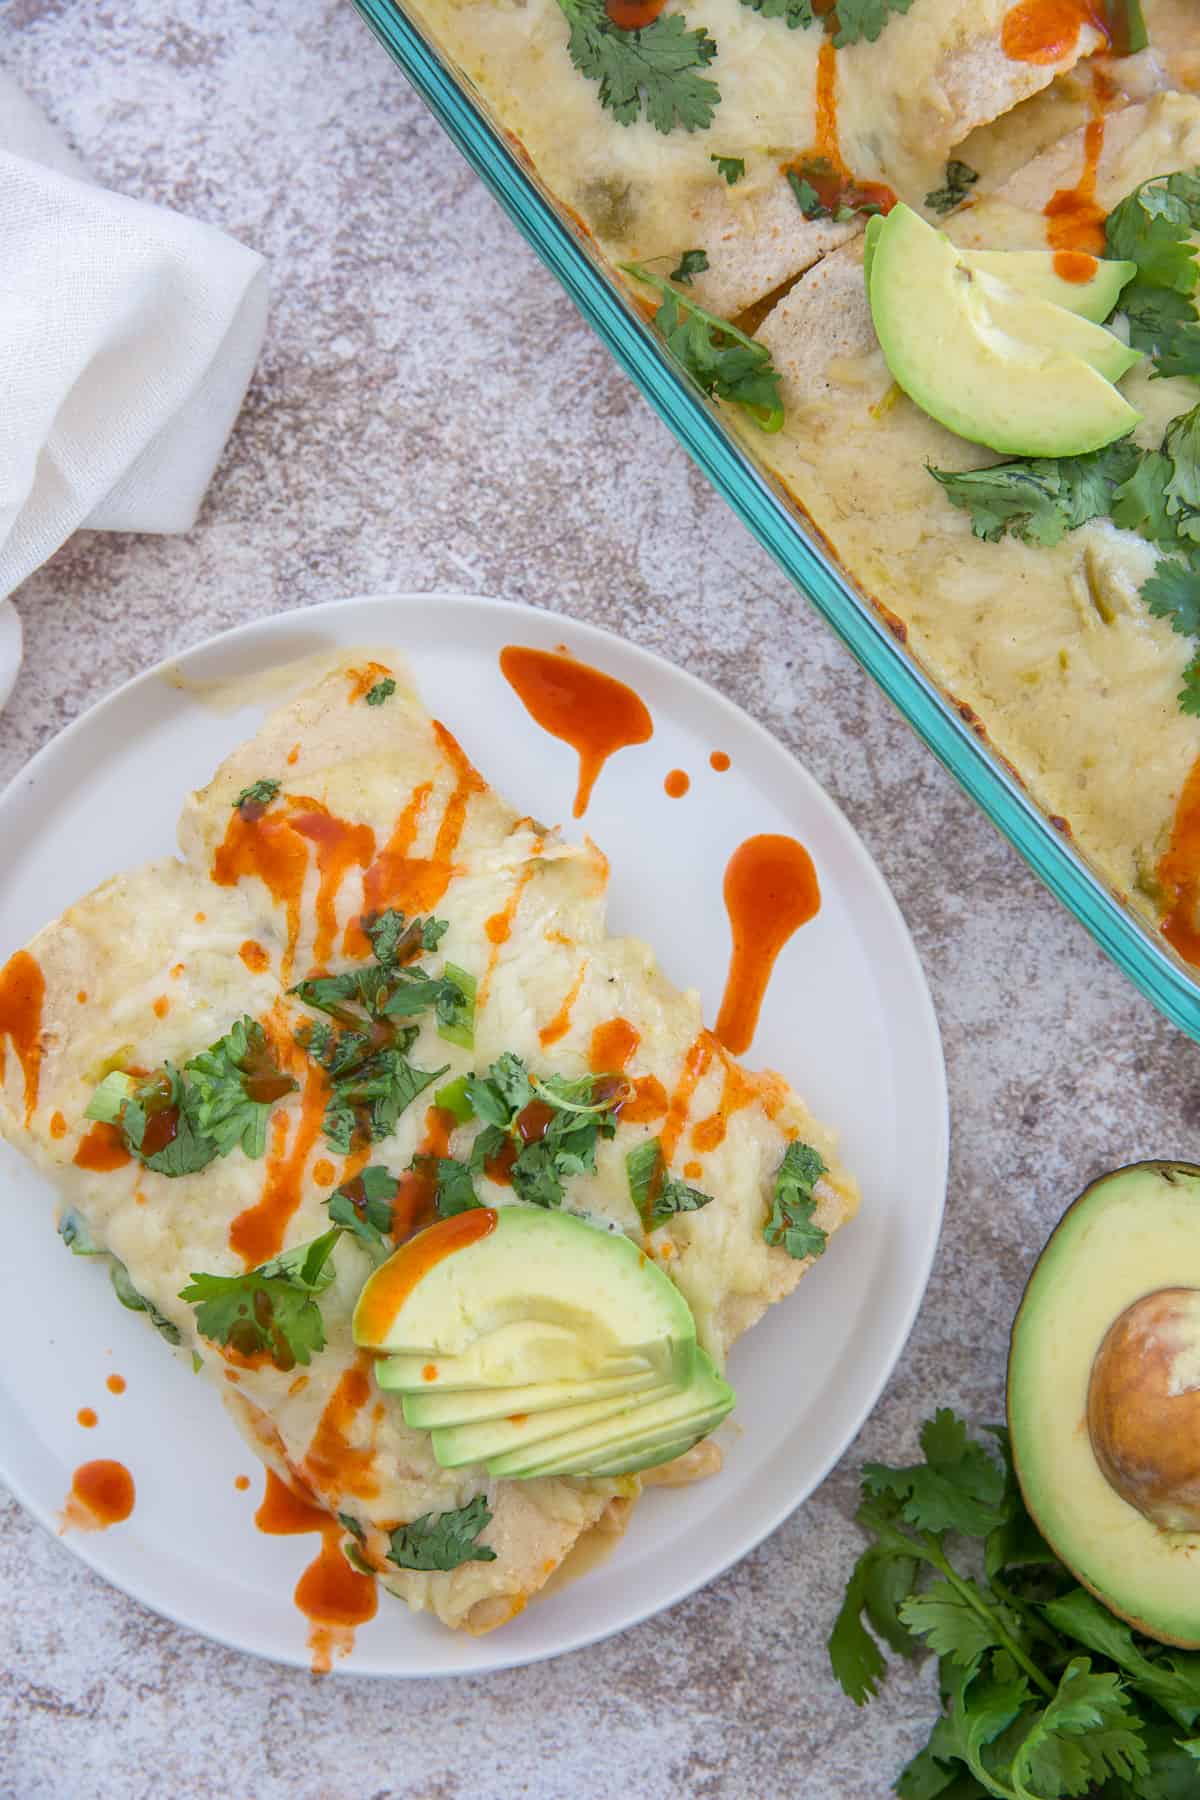 An over the top image of easy sour cream chicken enchiladas topped with cilantro, avocado and hot sauce.